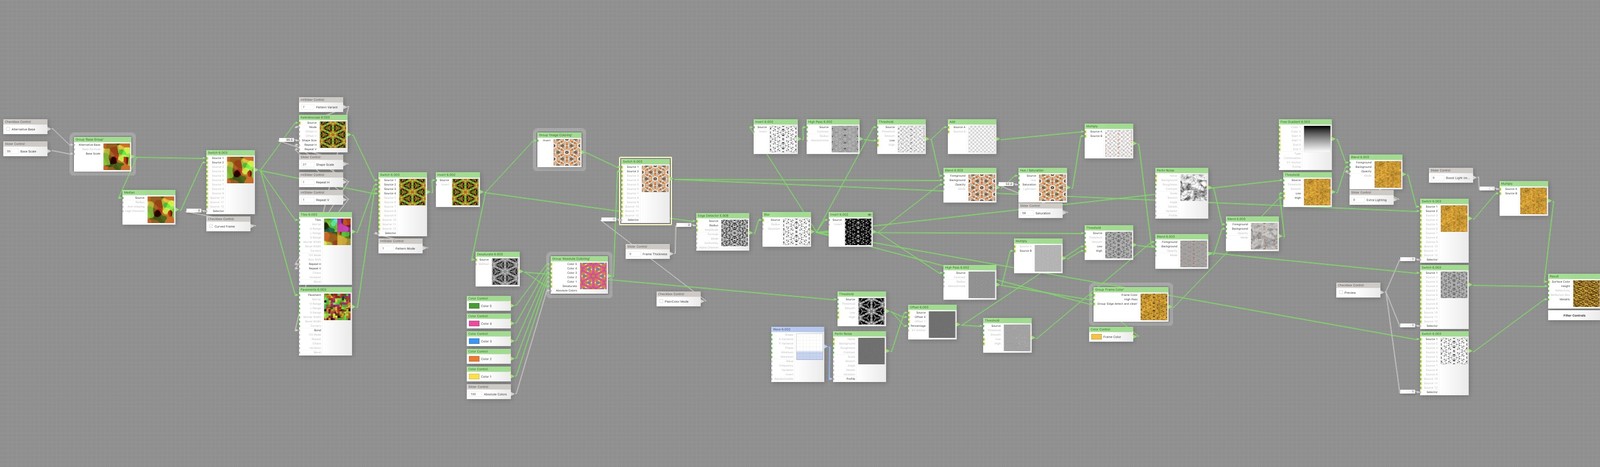 Here's a really hard to see image of that node structure in FilterForge.